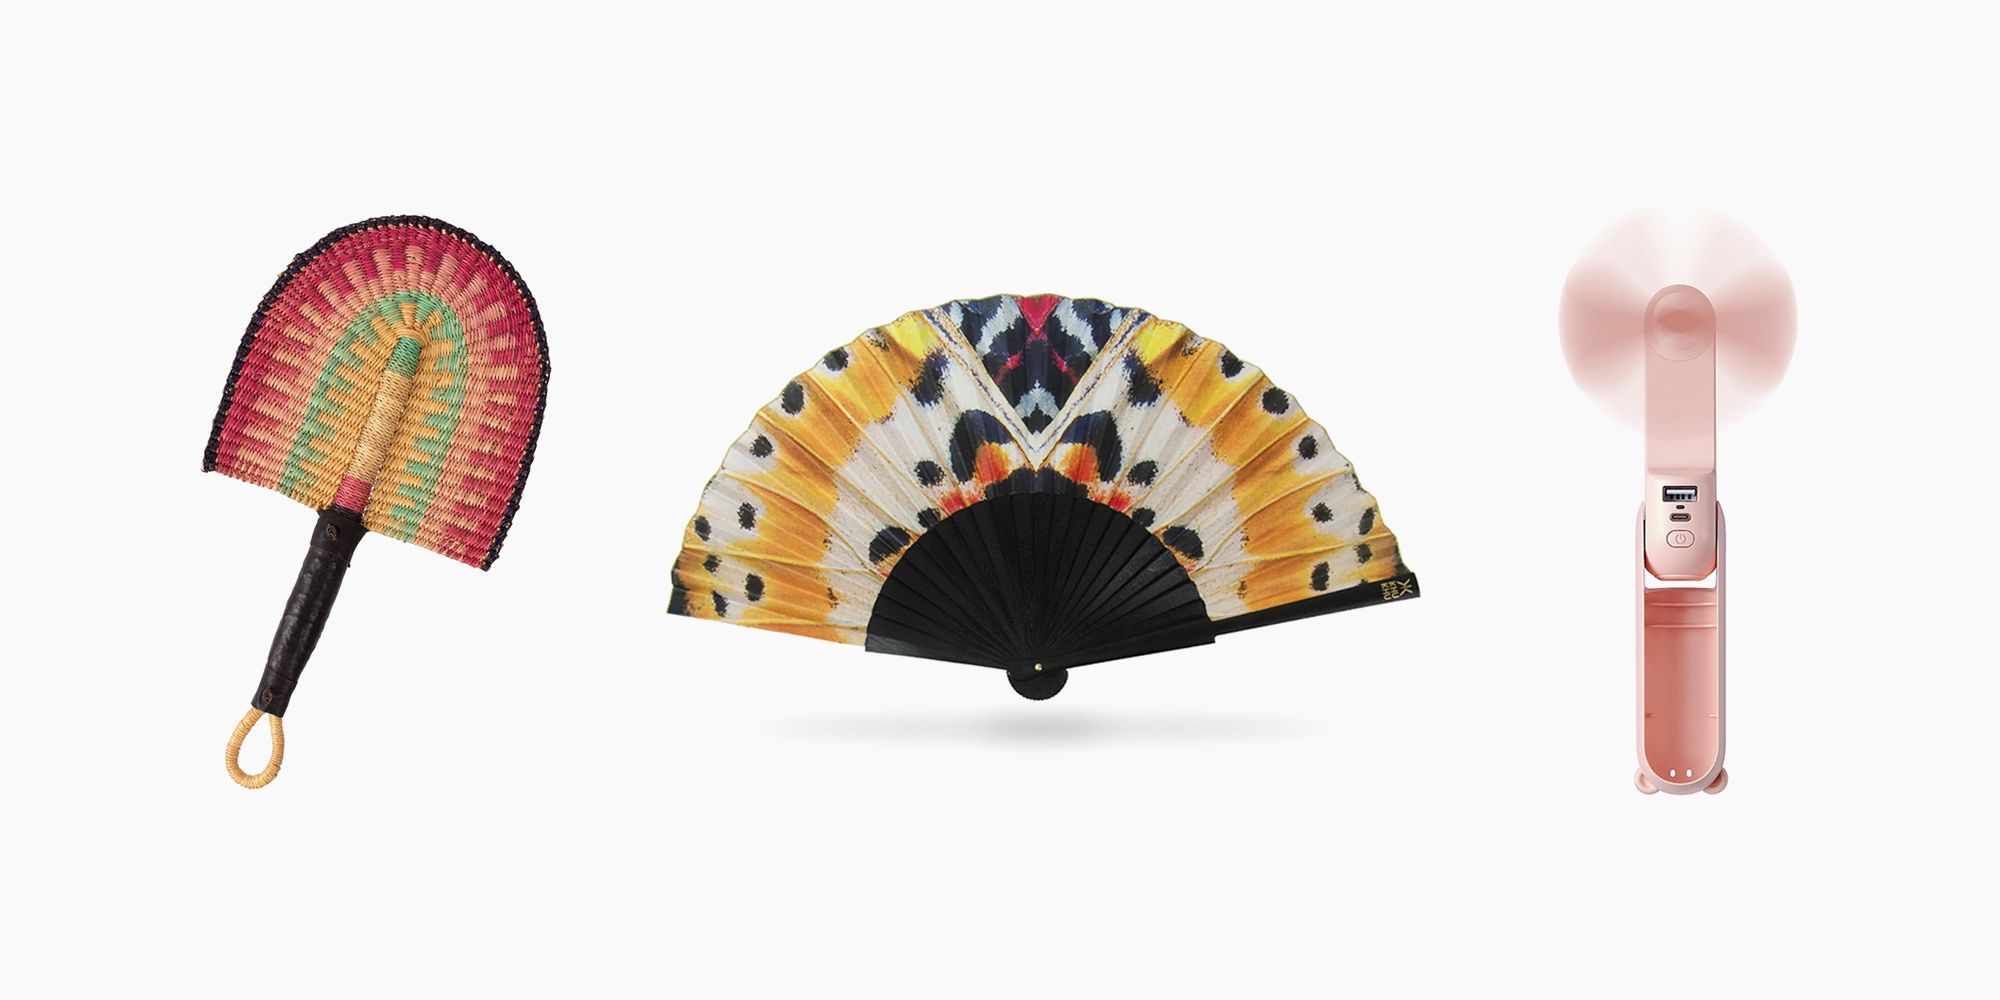 Best Stylish Hand Fans to Stay Cool - The New York Times